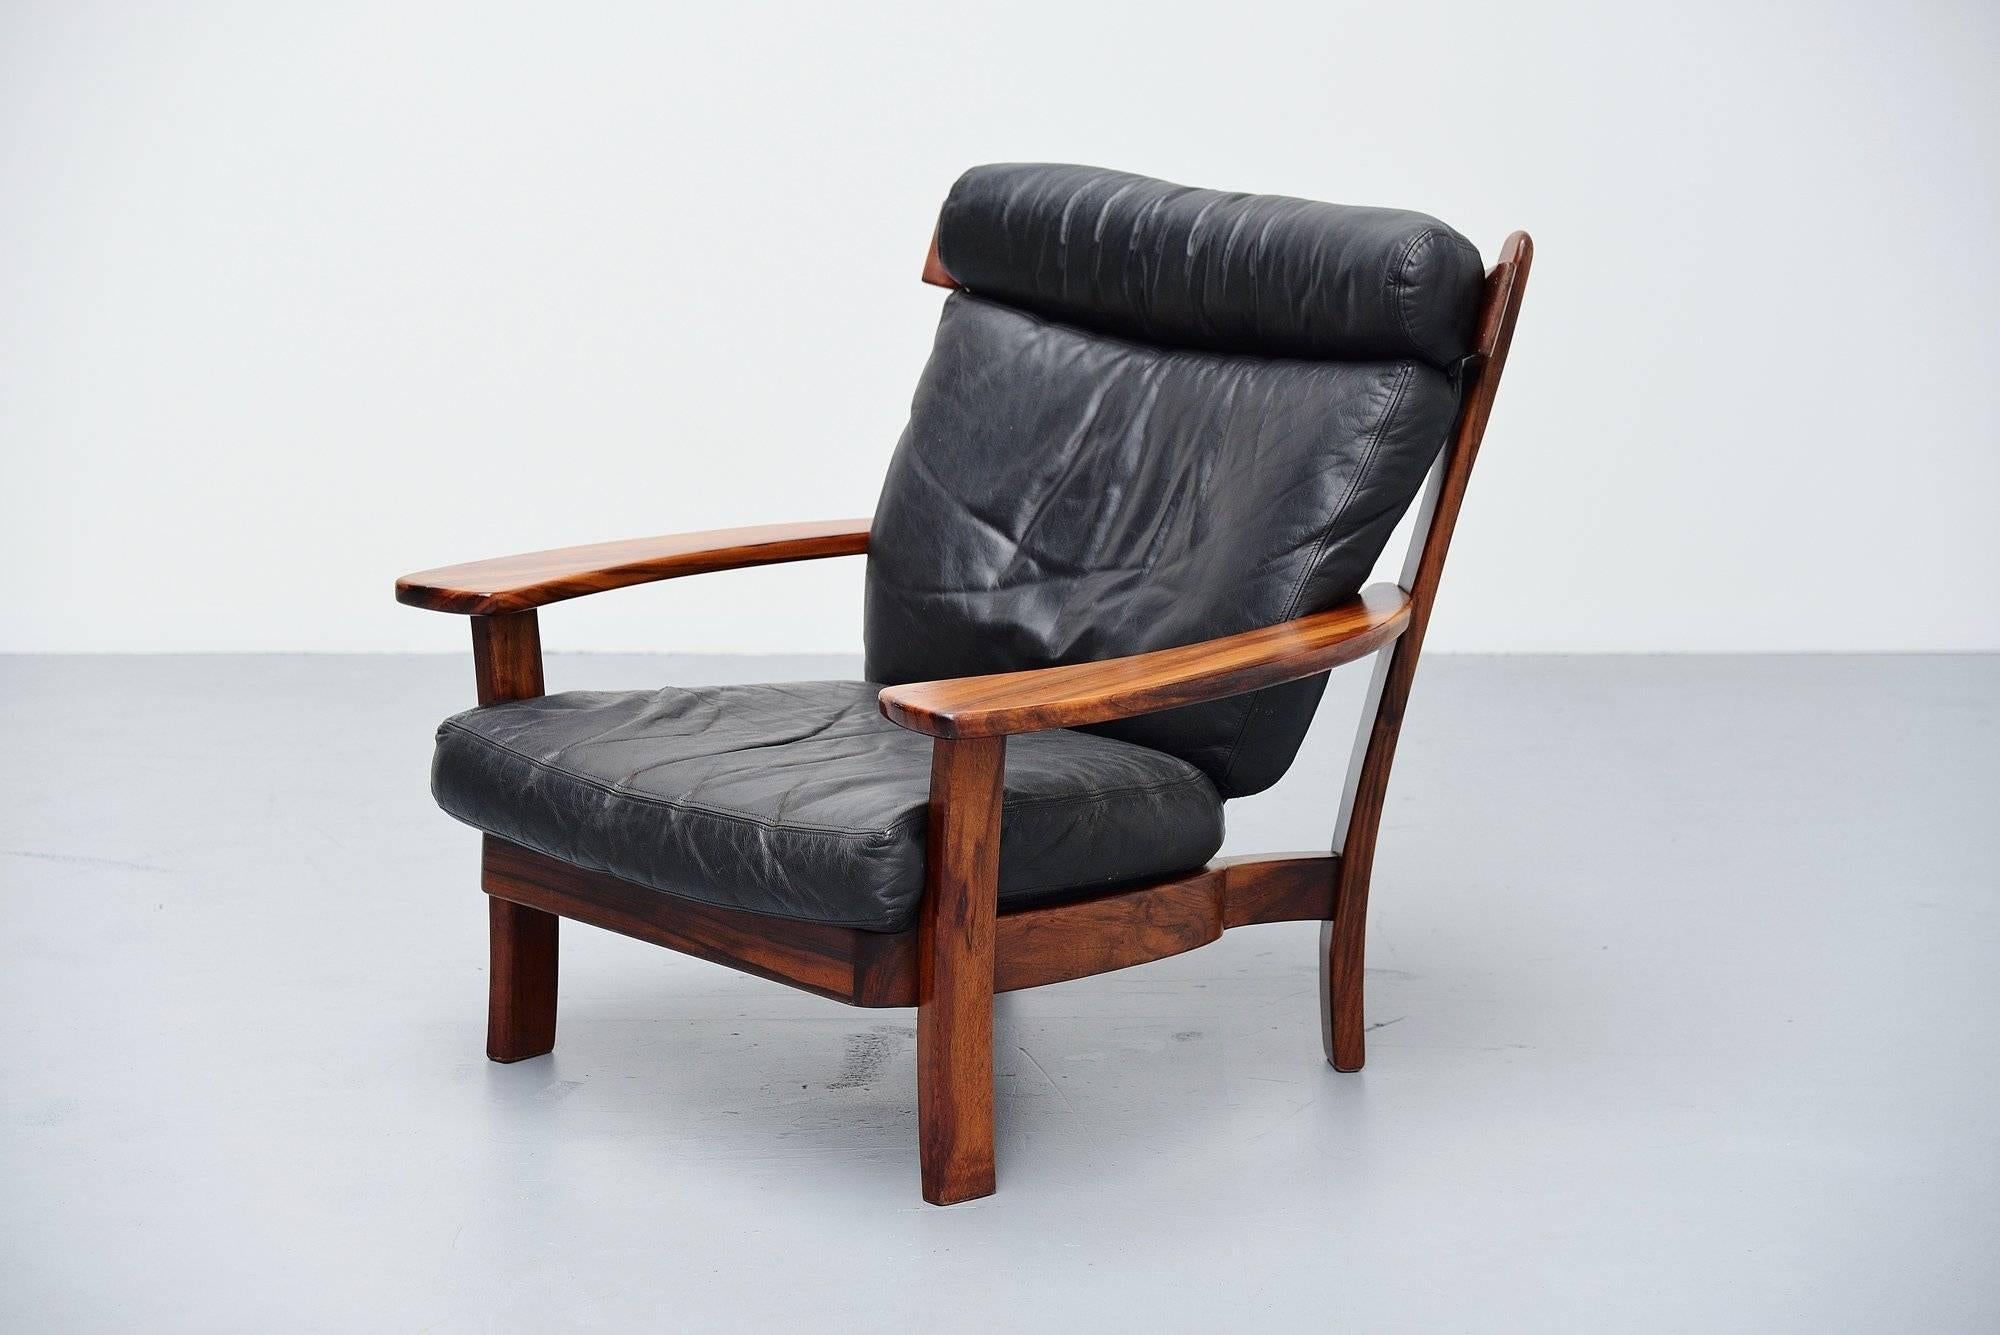 Fantastic so called 'Ox' lounge chair made by unknown designer or manufacturer, Brazil 1960. This chair has a solid Brazilian rosewood frame and a black leather upholstery. The wooden frame has a very nice grain to it which gives a fantastic